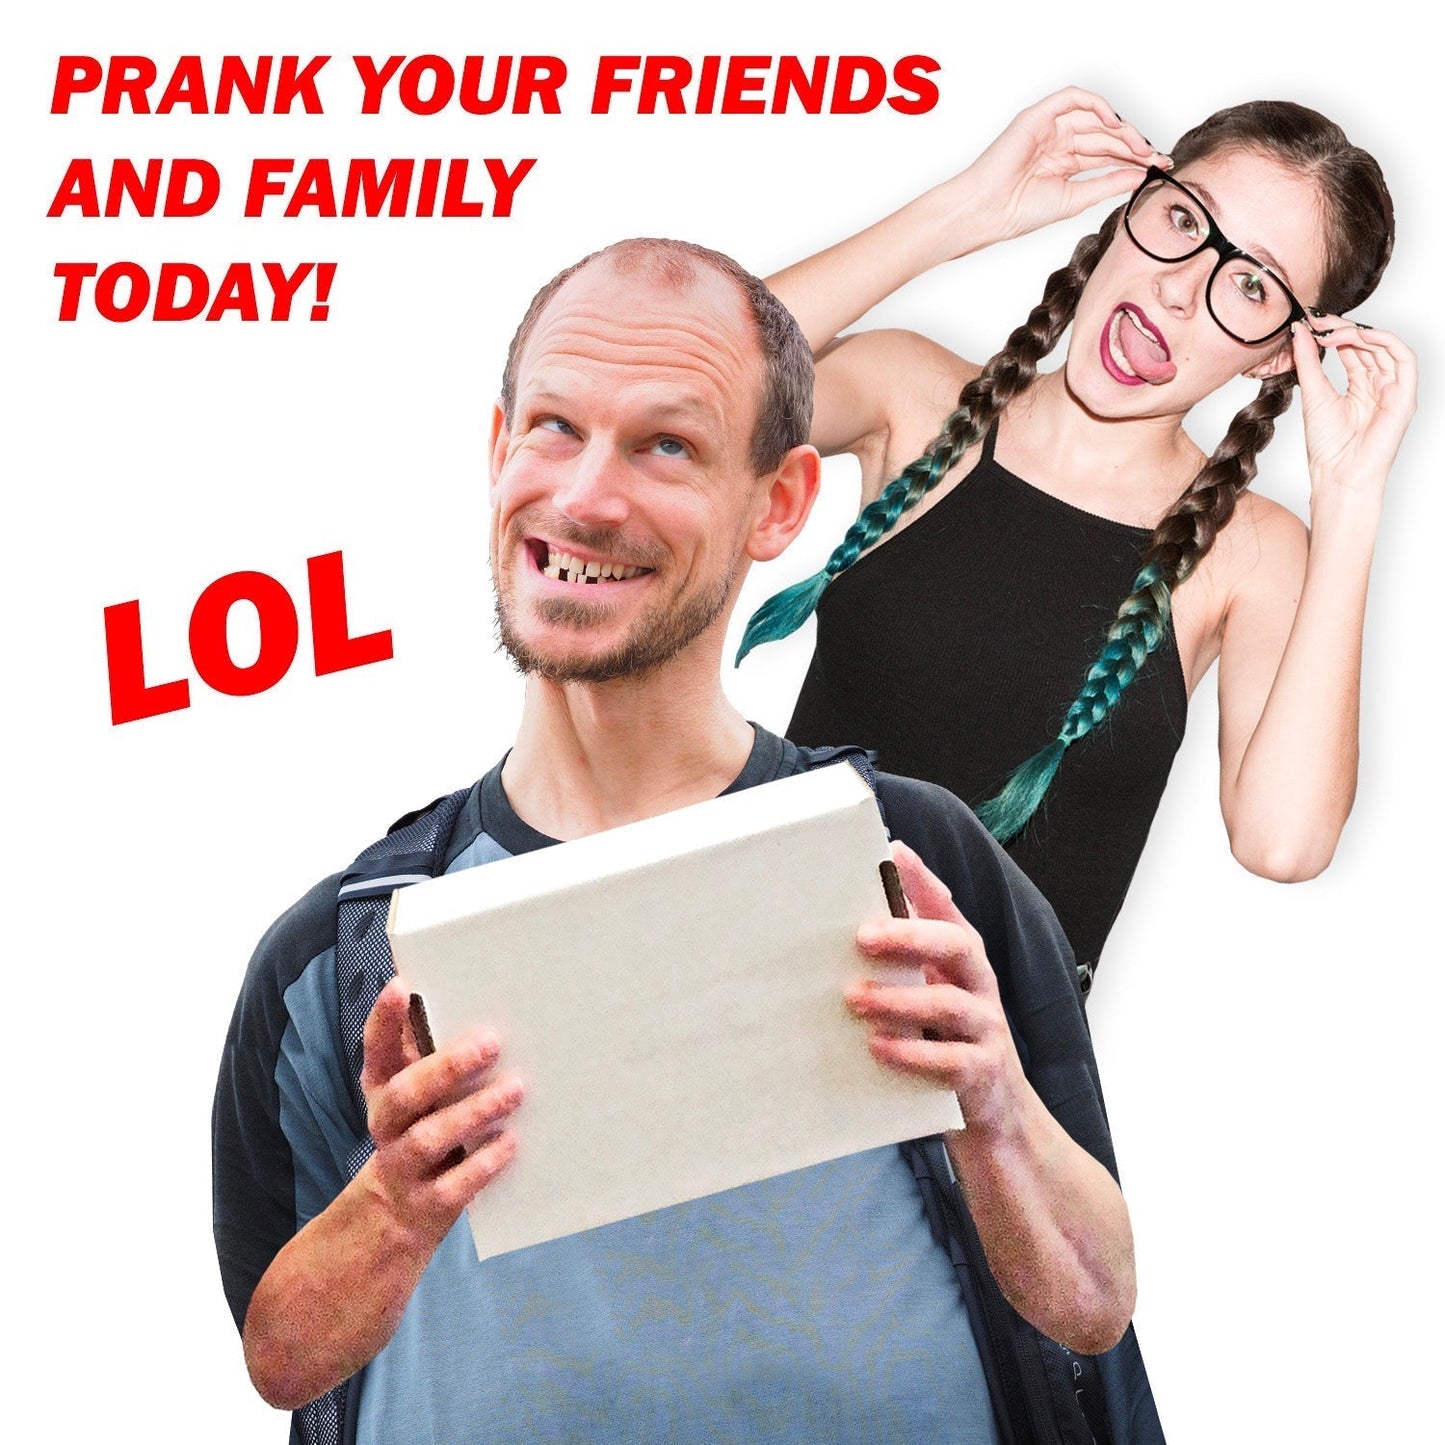 Extra Small Condoms embarrassing prank box gets mailed directly to your victims 100% anonymously!